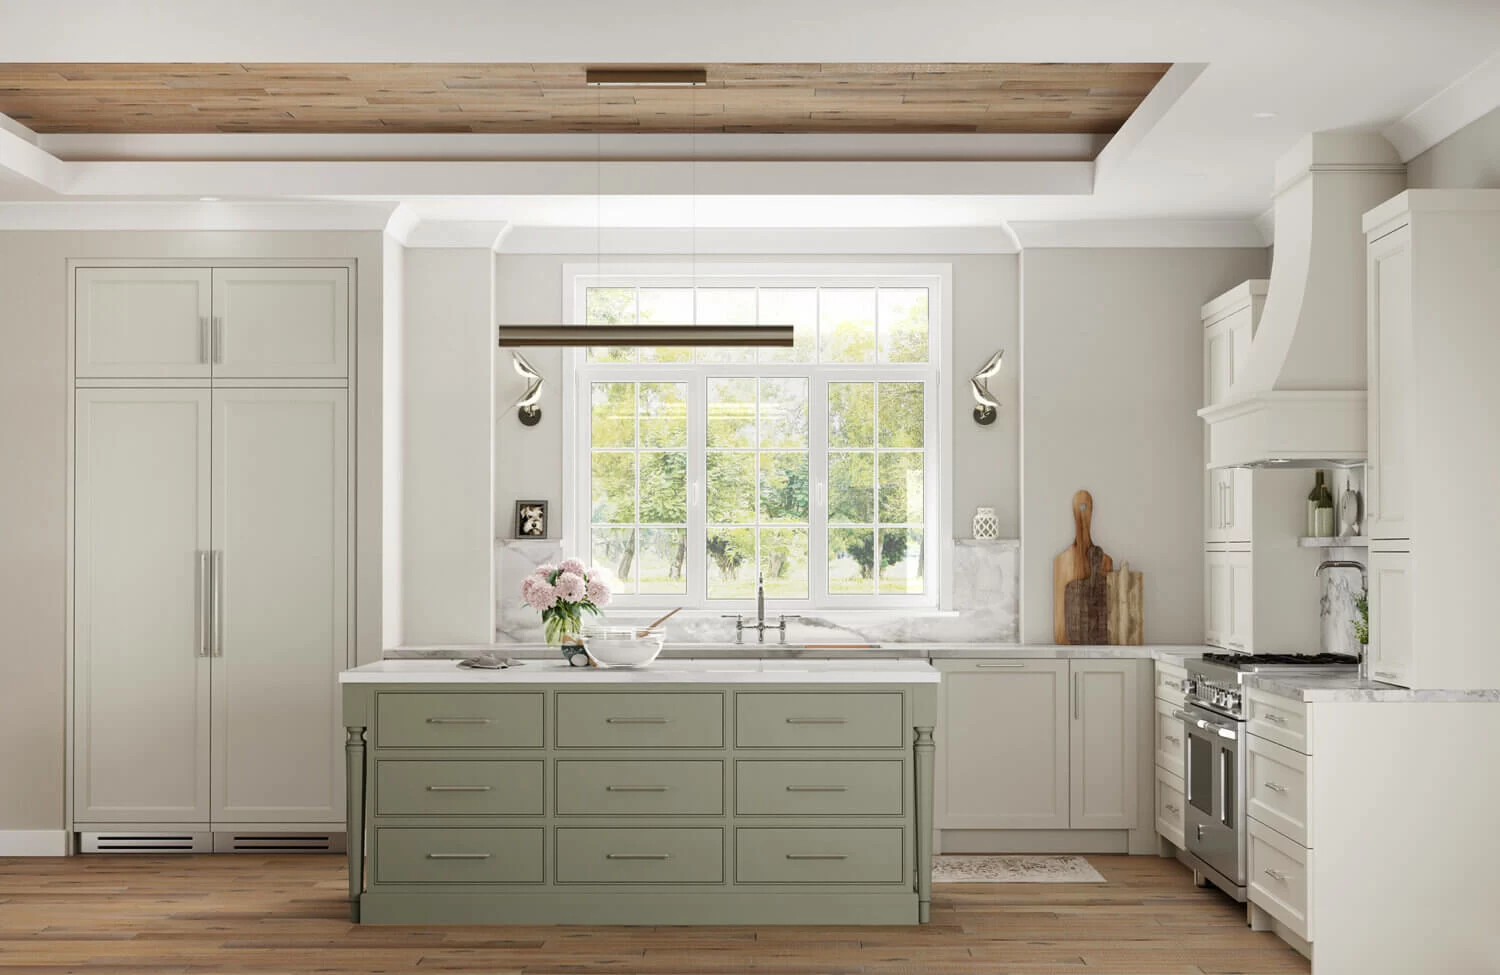 A Modern English Style Kitchen with Dramatic Cabinet Door Styles - Dura ...